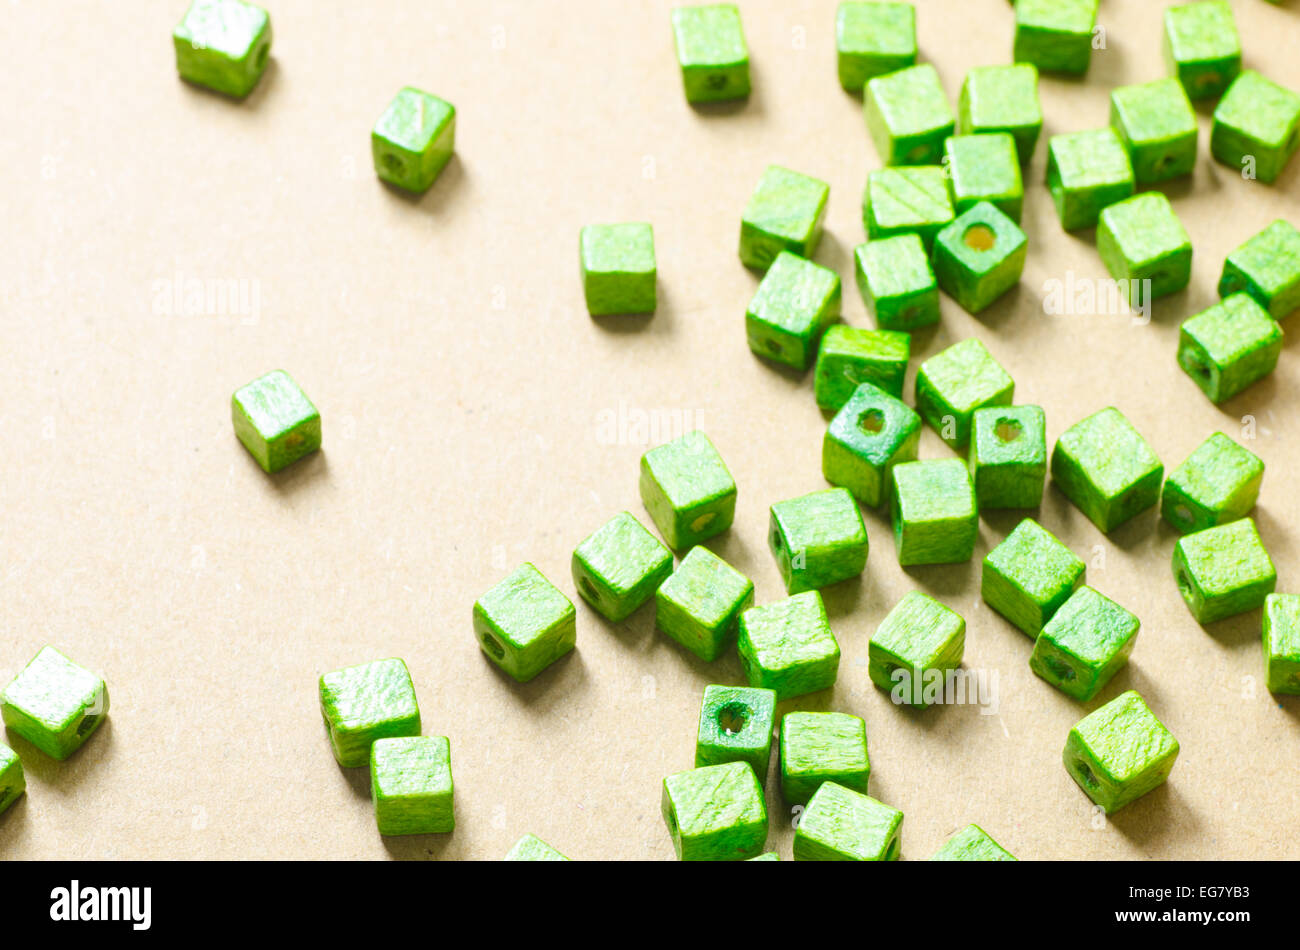 green wooden cubic beads on paper background Stock Photo